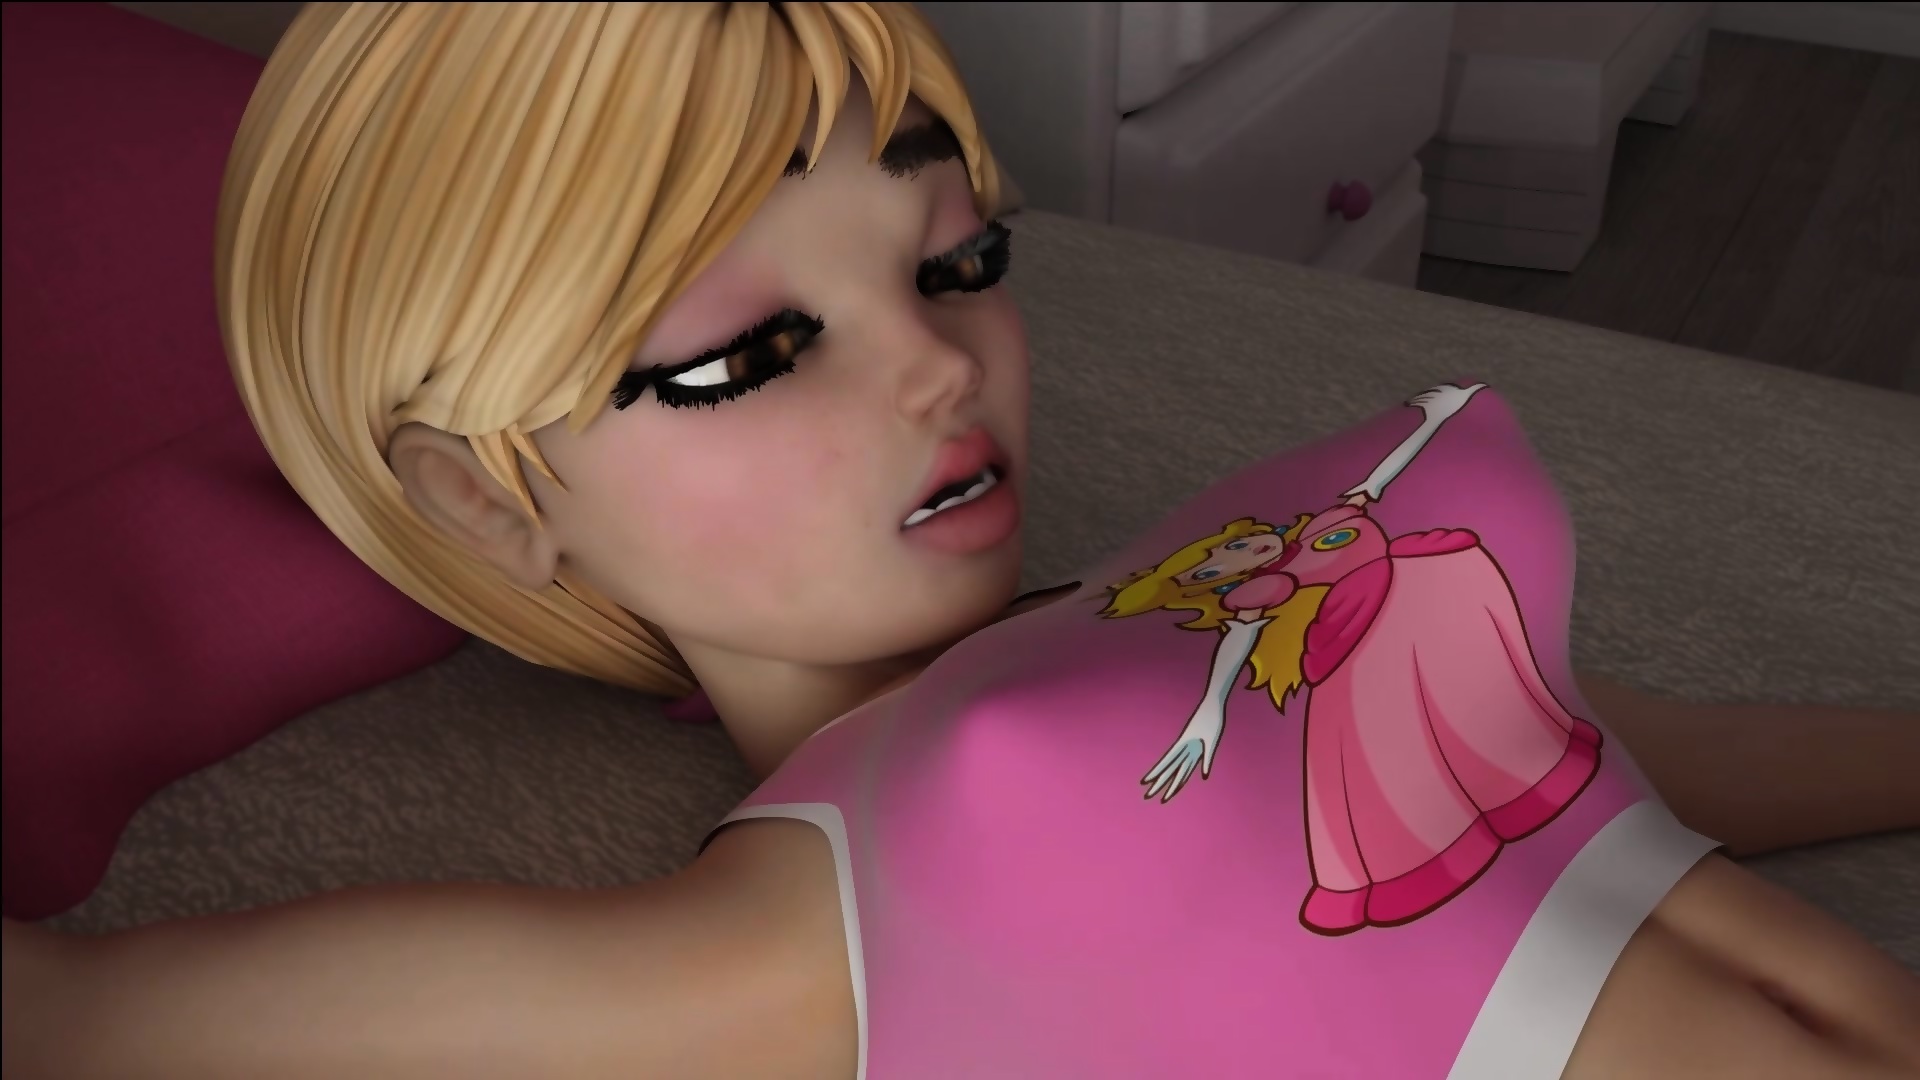 3d Animation Porn Girls - Sucking One Girl With Big Cock And - 3D Animation - EPORNER